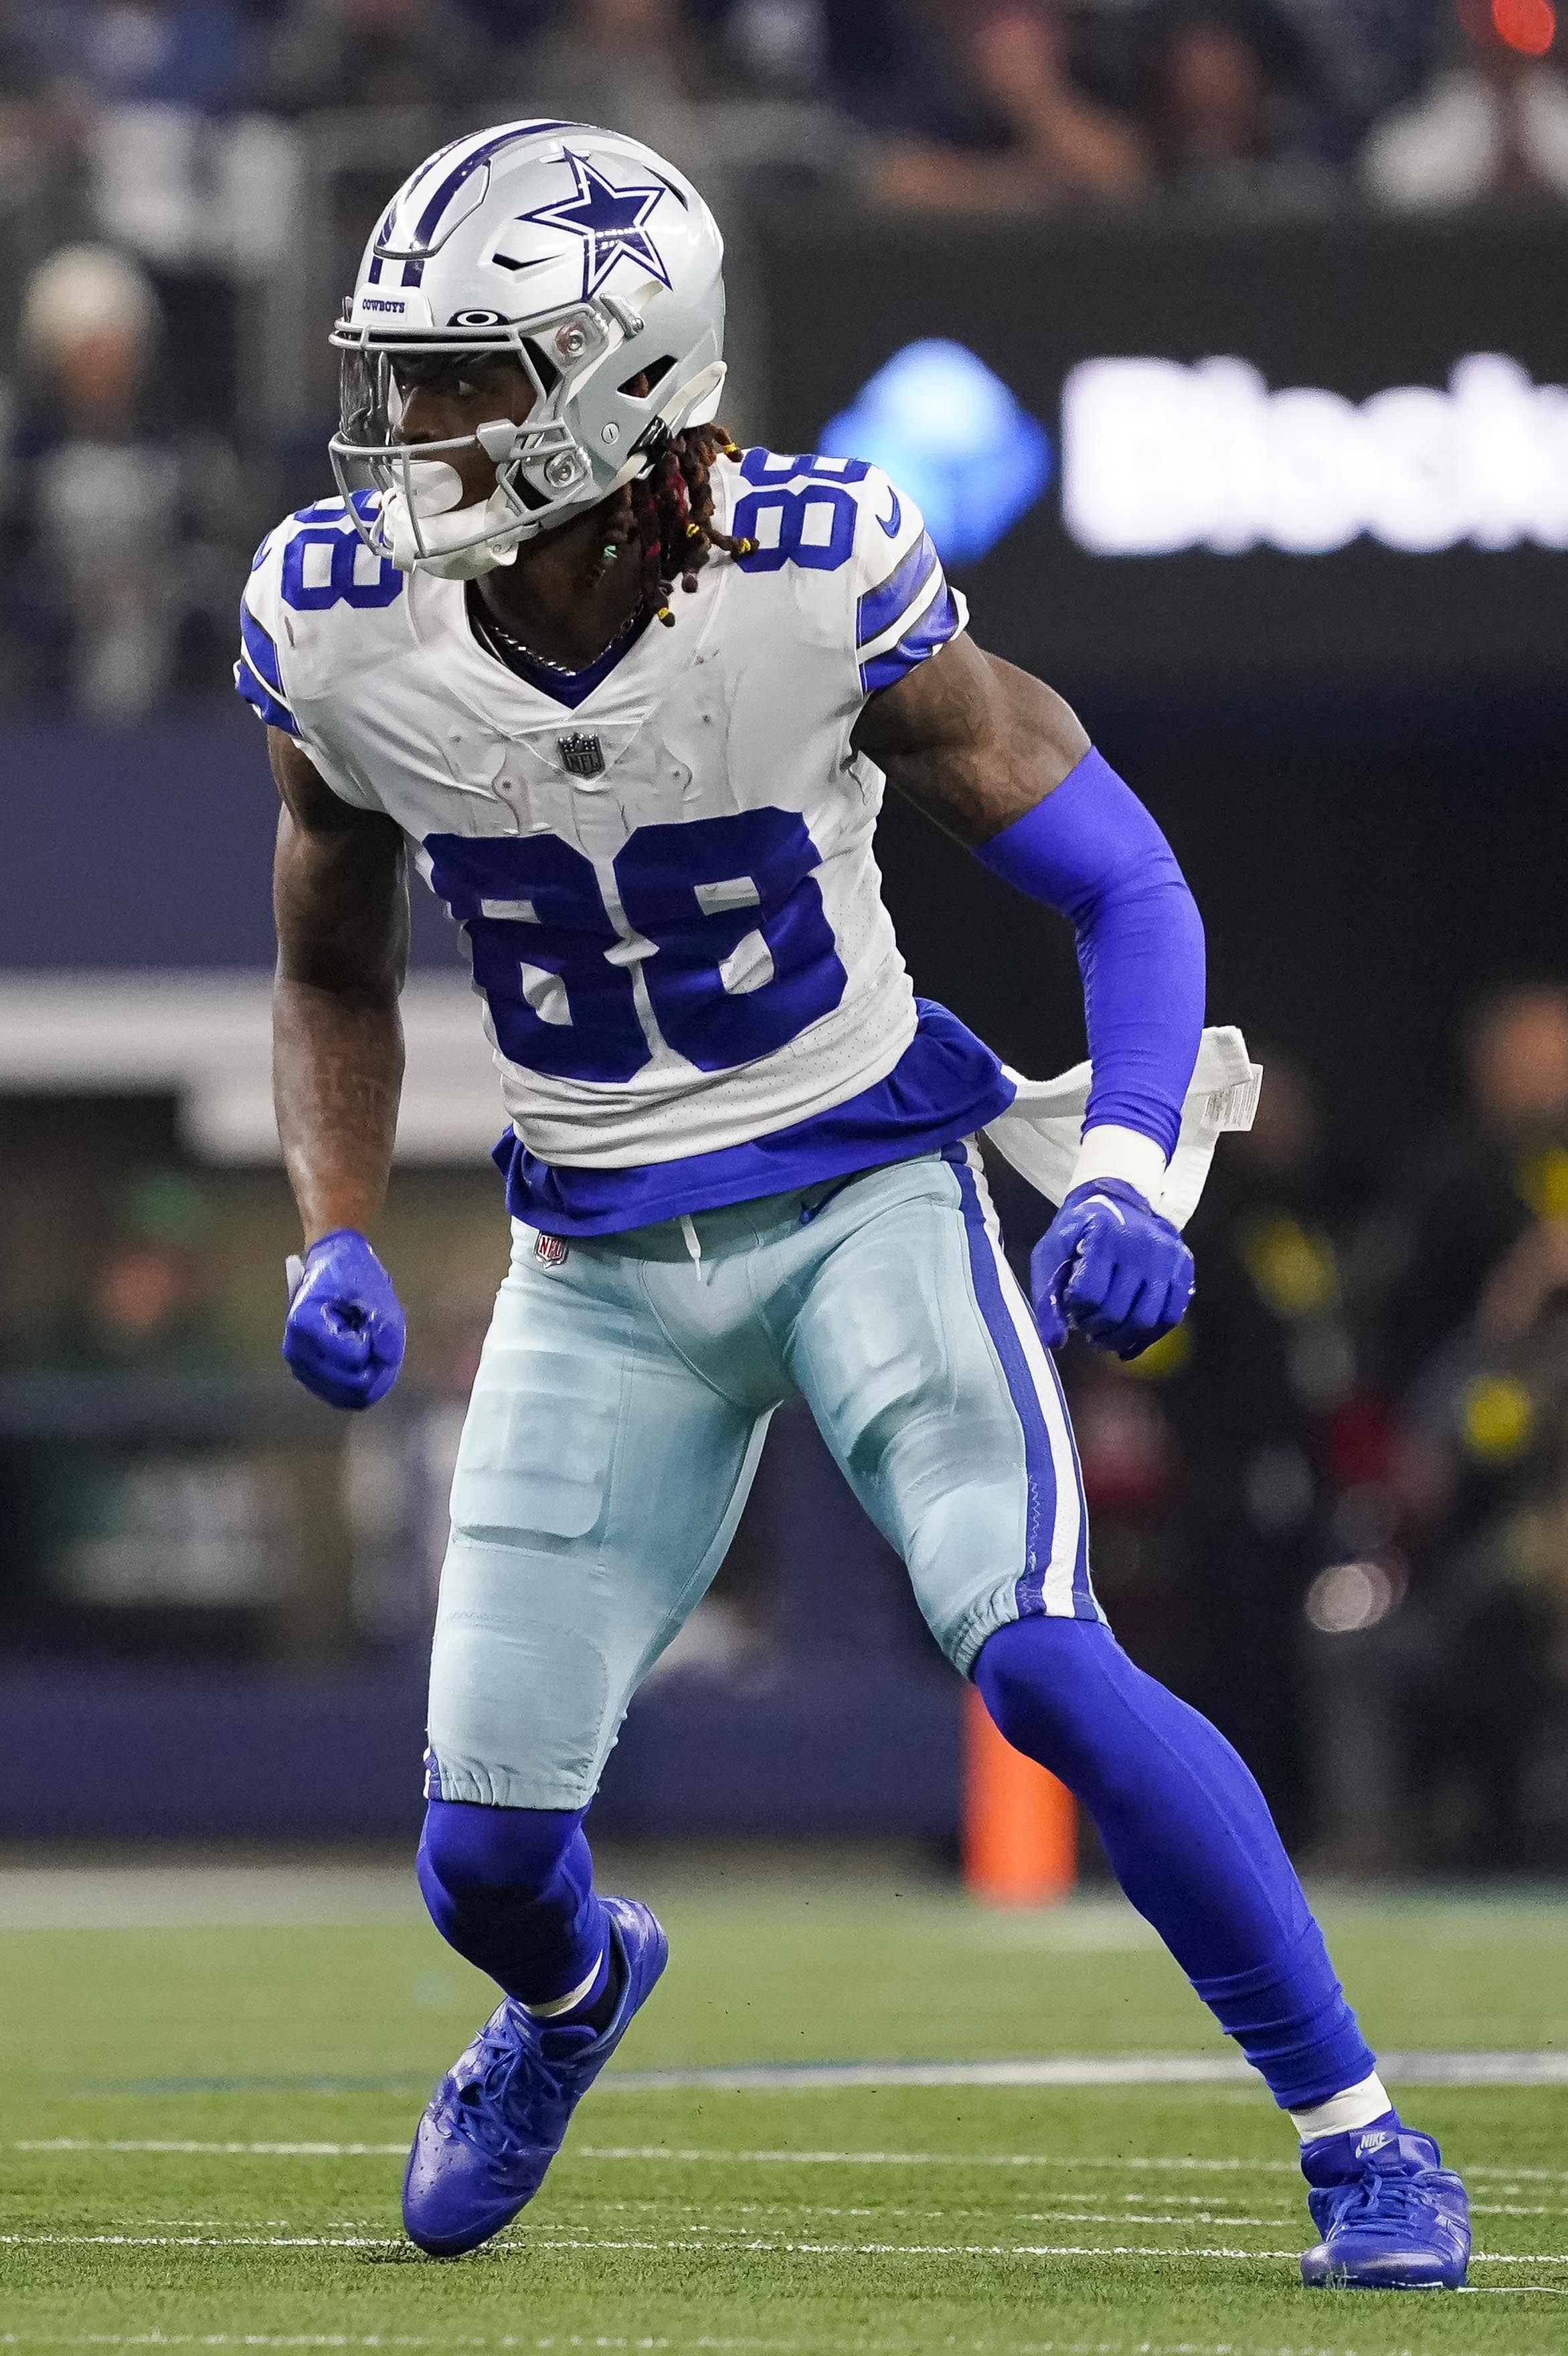 CeeDee Lamb #88 of the Dallas Cowboys runs during the second quarter of a game against the Philadelphia Eagles at AT&amp;T Stadium on December 24, 2022 in Arlington, Texas.